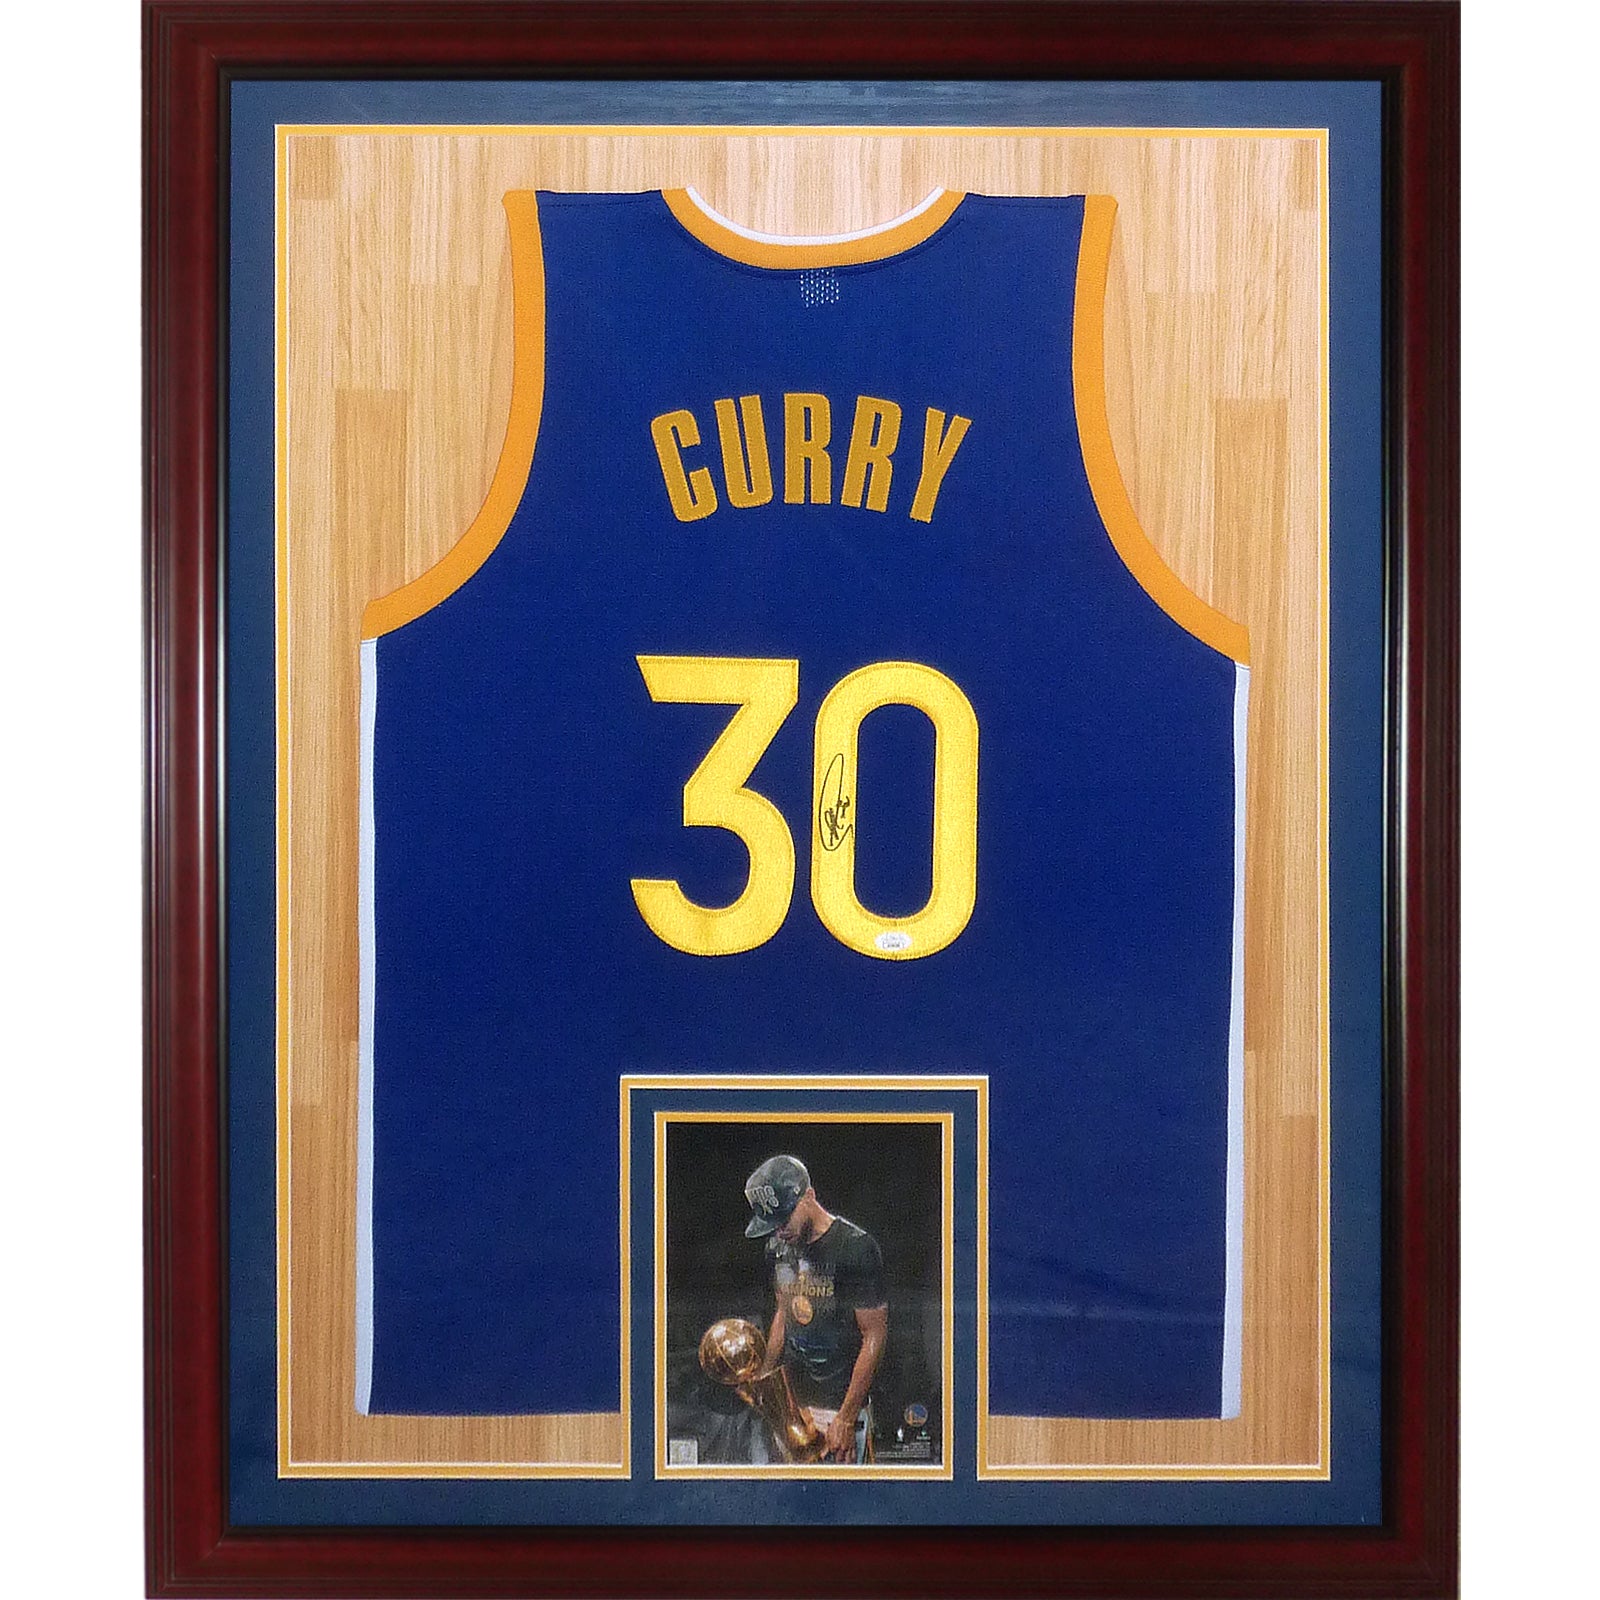 Charlotte all-star edition Steph curry jersey new!!! for Sale in